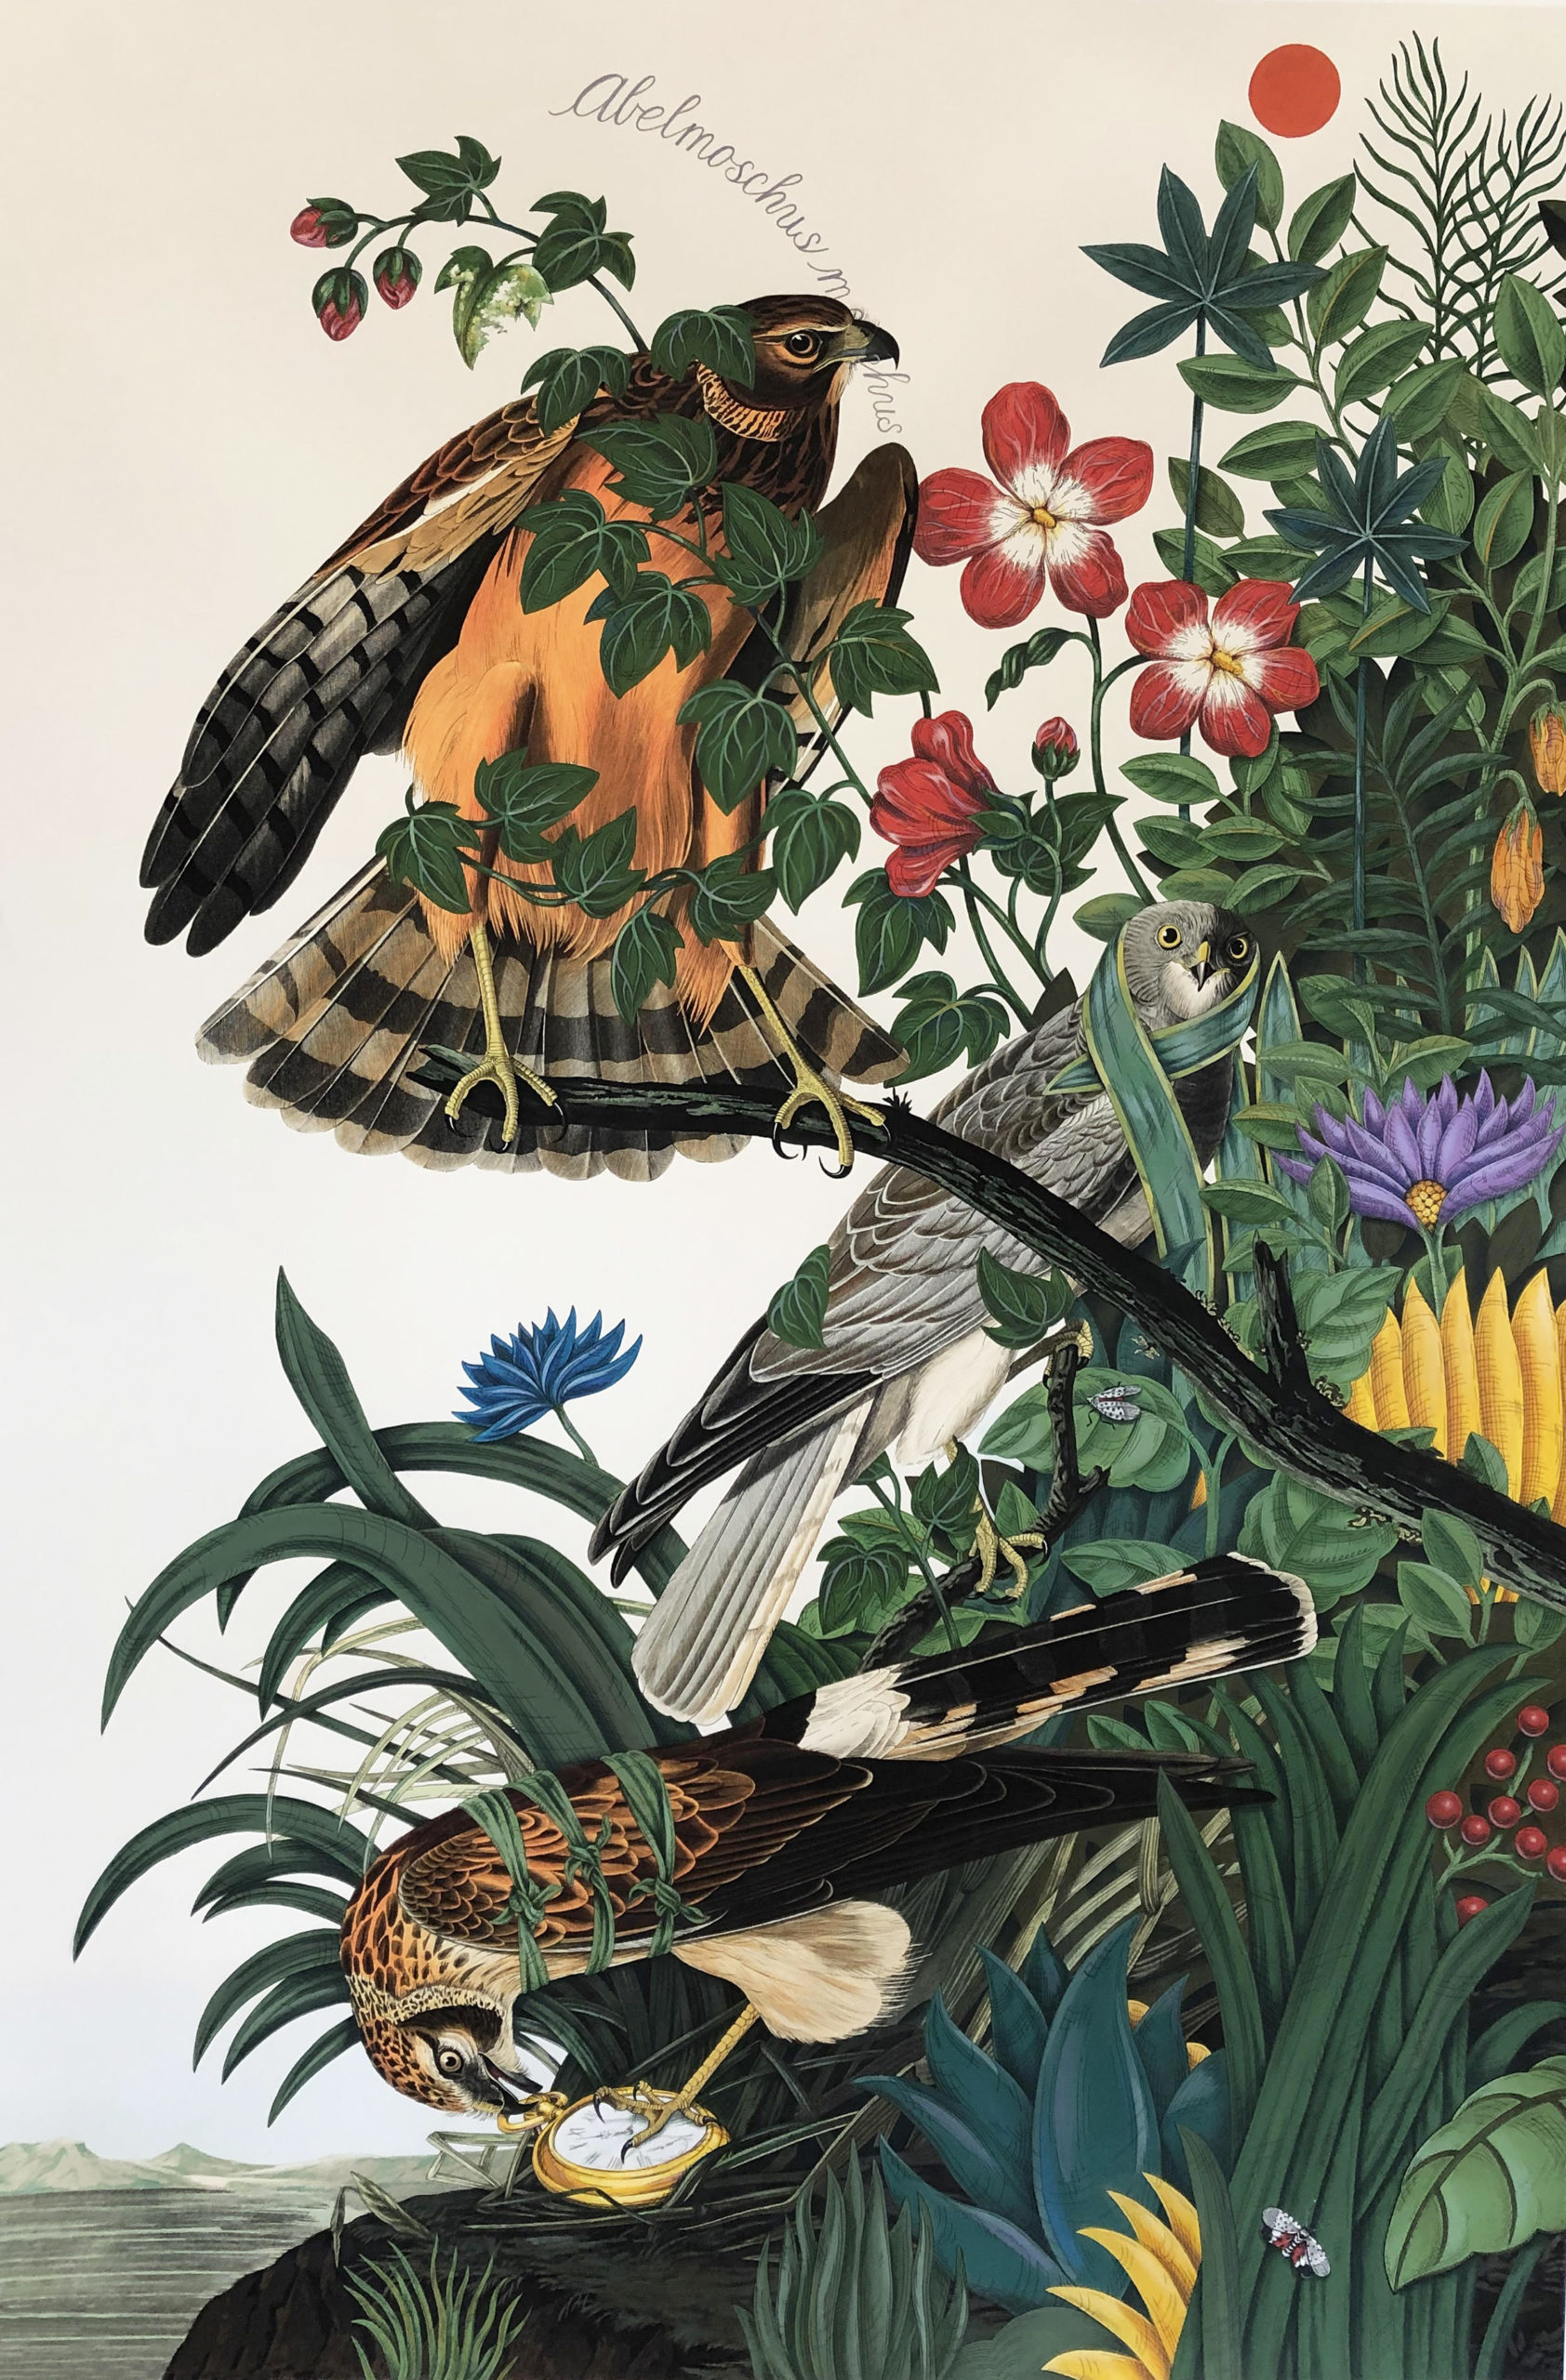 

											Penelope Gottlieb</b>

											<em>
												Still Lives  New work by Penelope Gottlieb</em> 

											<h4>
												July 29 - September 23, 2022											</h4>

		                																																													<i>Abelmoschus moschatus,</i>  
																																																					acrylic and ink over a digital reproduction of an Audubon print, 
																																								60 x 40 inches 
																								
		                				